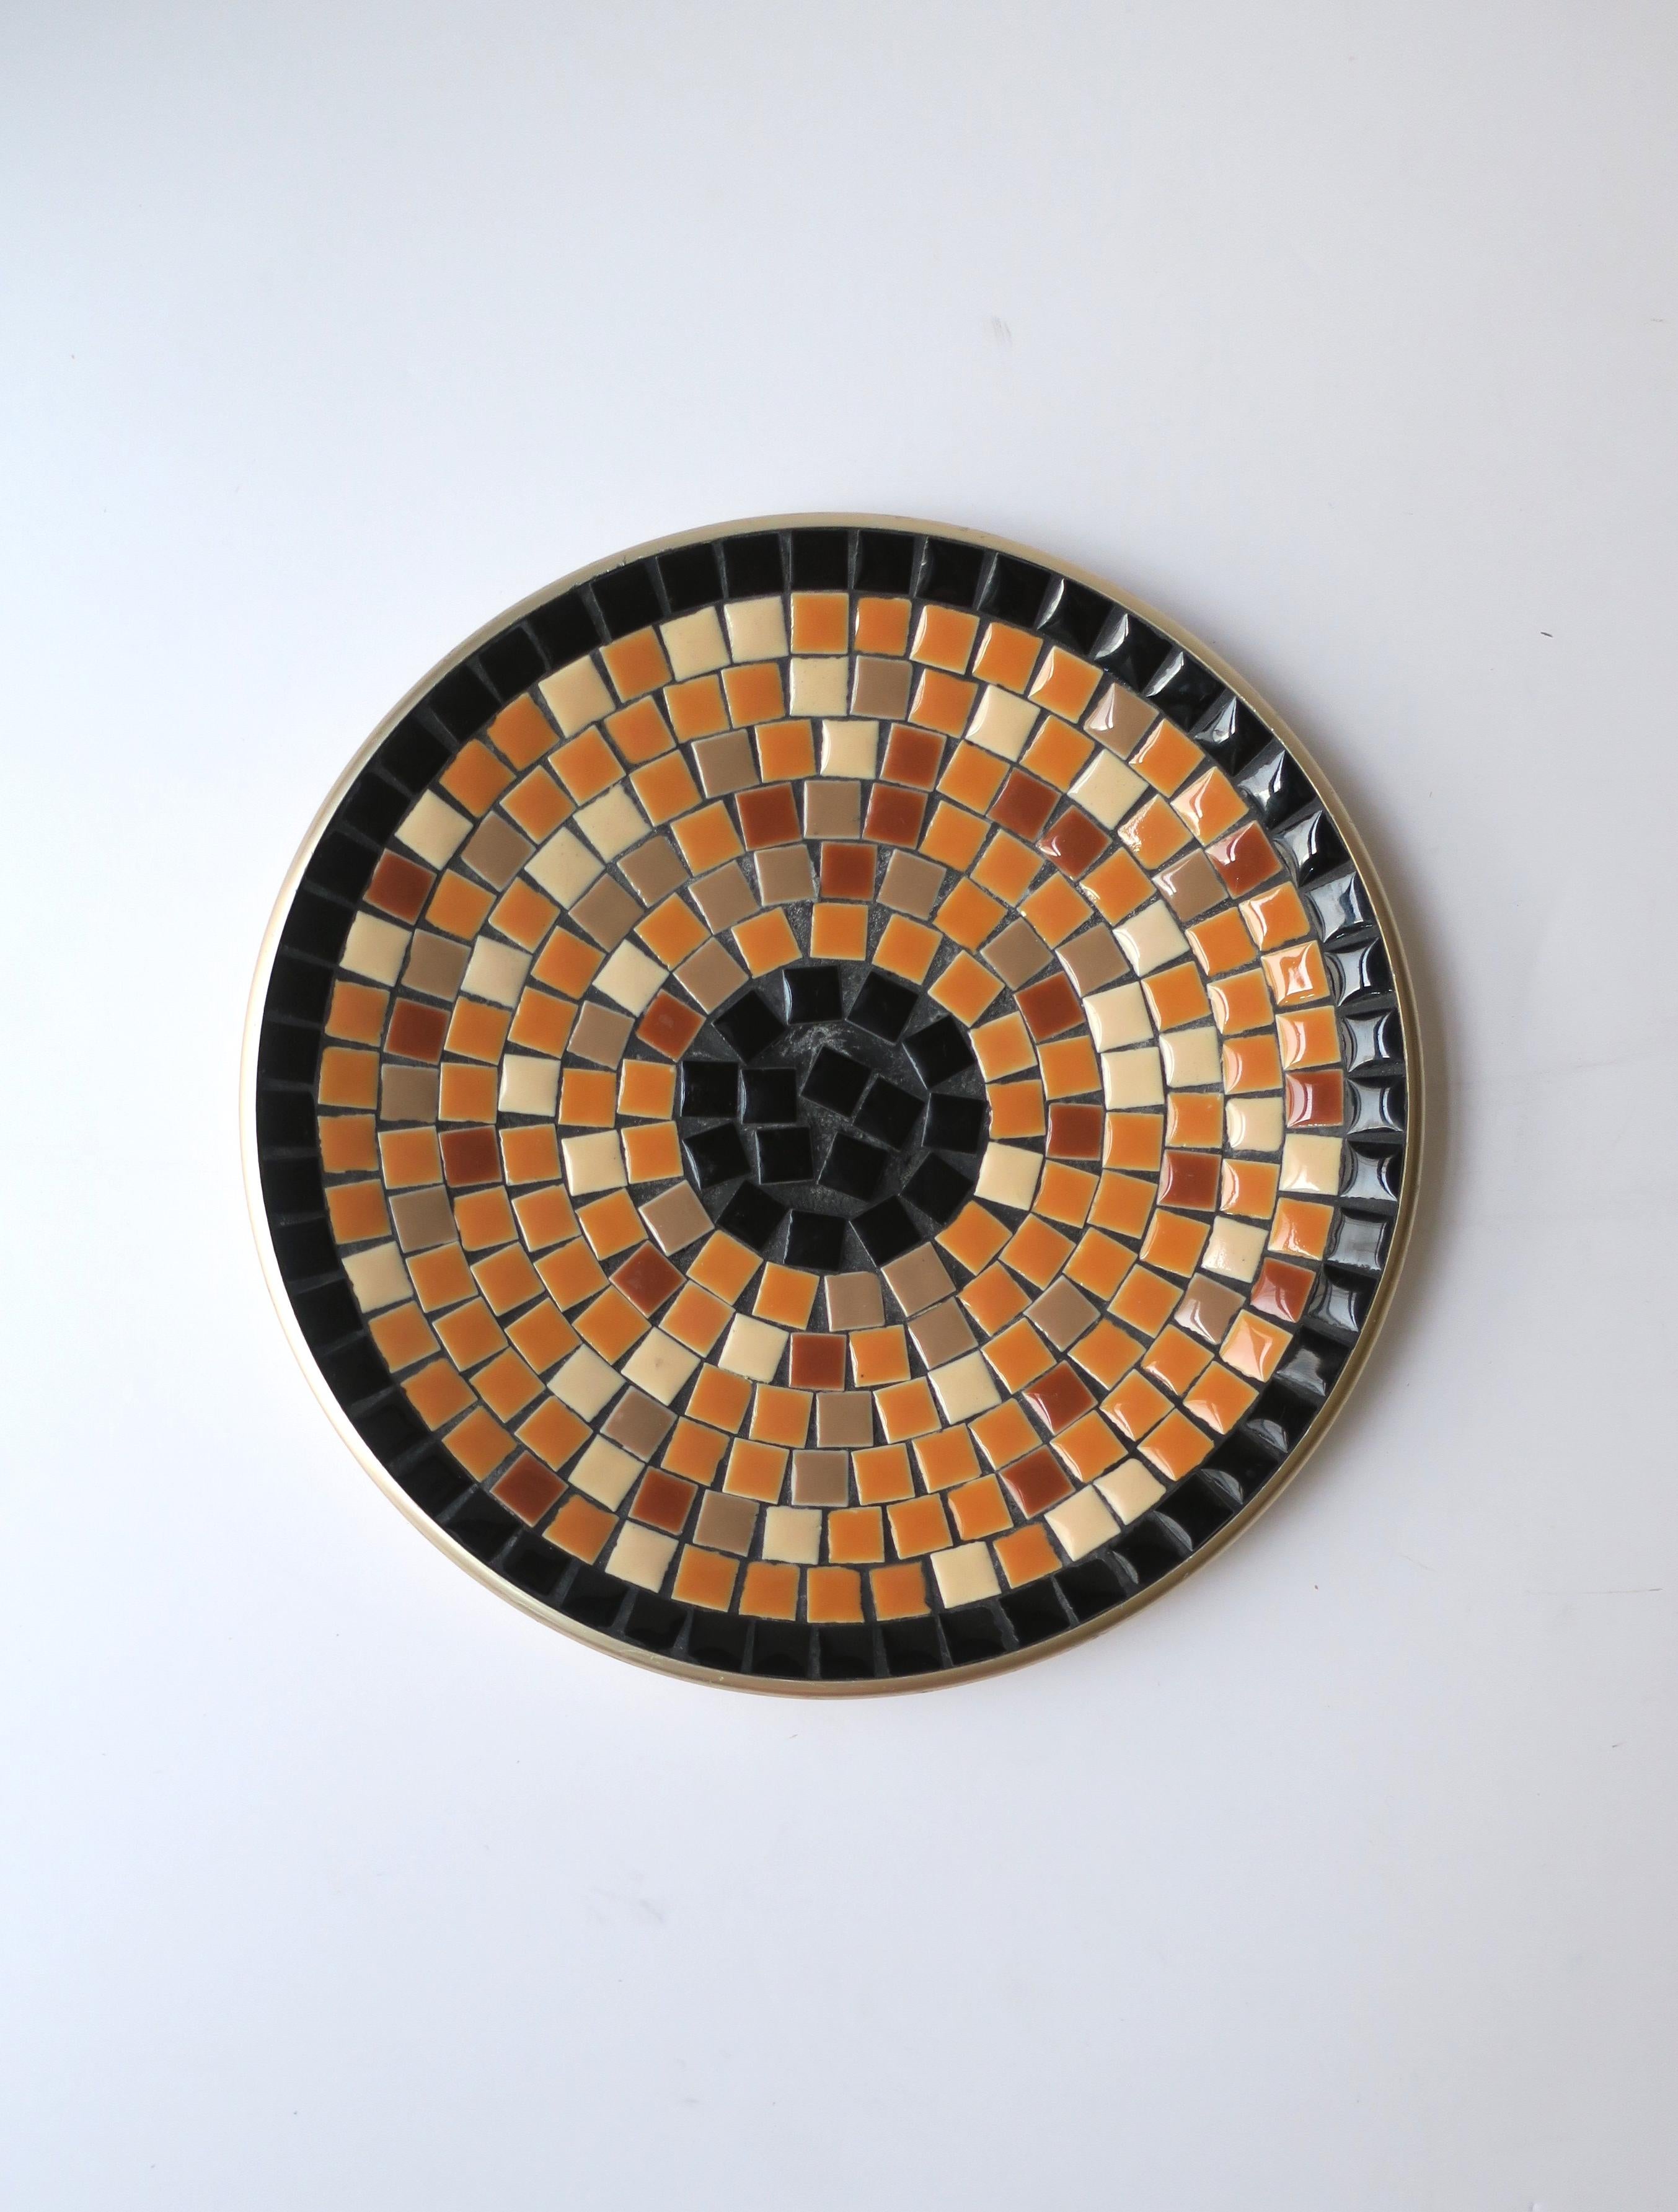 A very beautiful Mid-Century Modern round tile mosaic dish vide-poche catchall, circa 1960s. Dish is designed with black, and terracotta glazed ceramic tiles and black grout. A beautiful standalone piece on a cocktail table, etc., or as a vide-poche